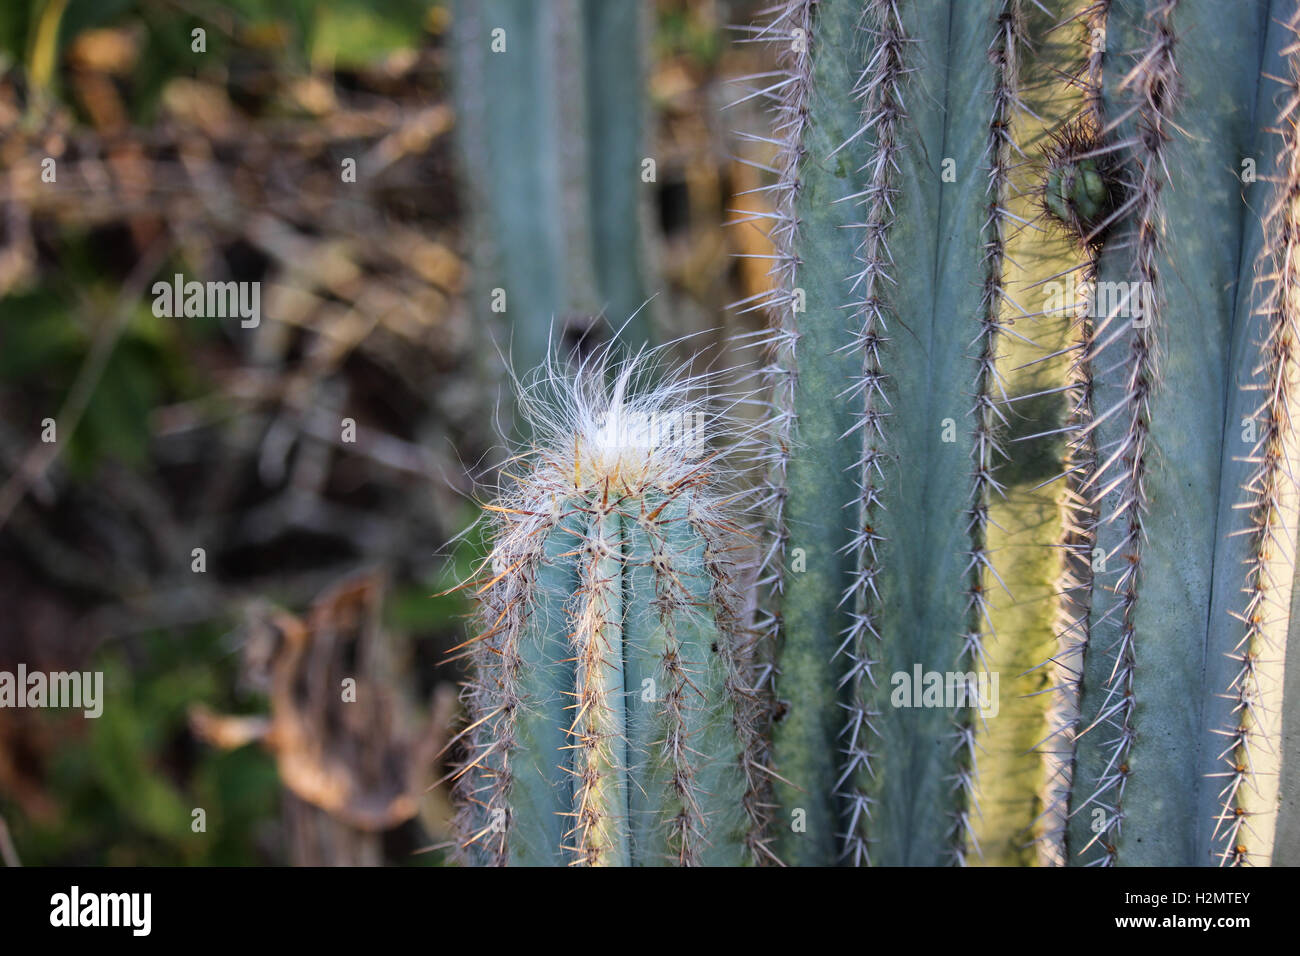 Specie of cactus Pilosocereus Ulei, also known as White Head Cactus. This type of cactus is only found in the region of Cabo Fri Stock Photo